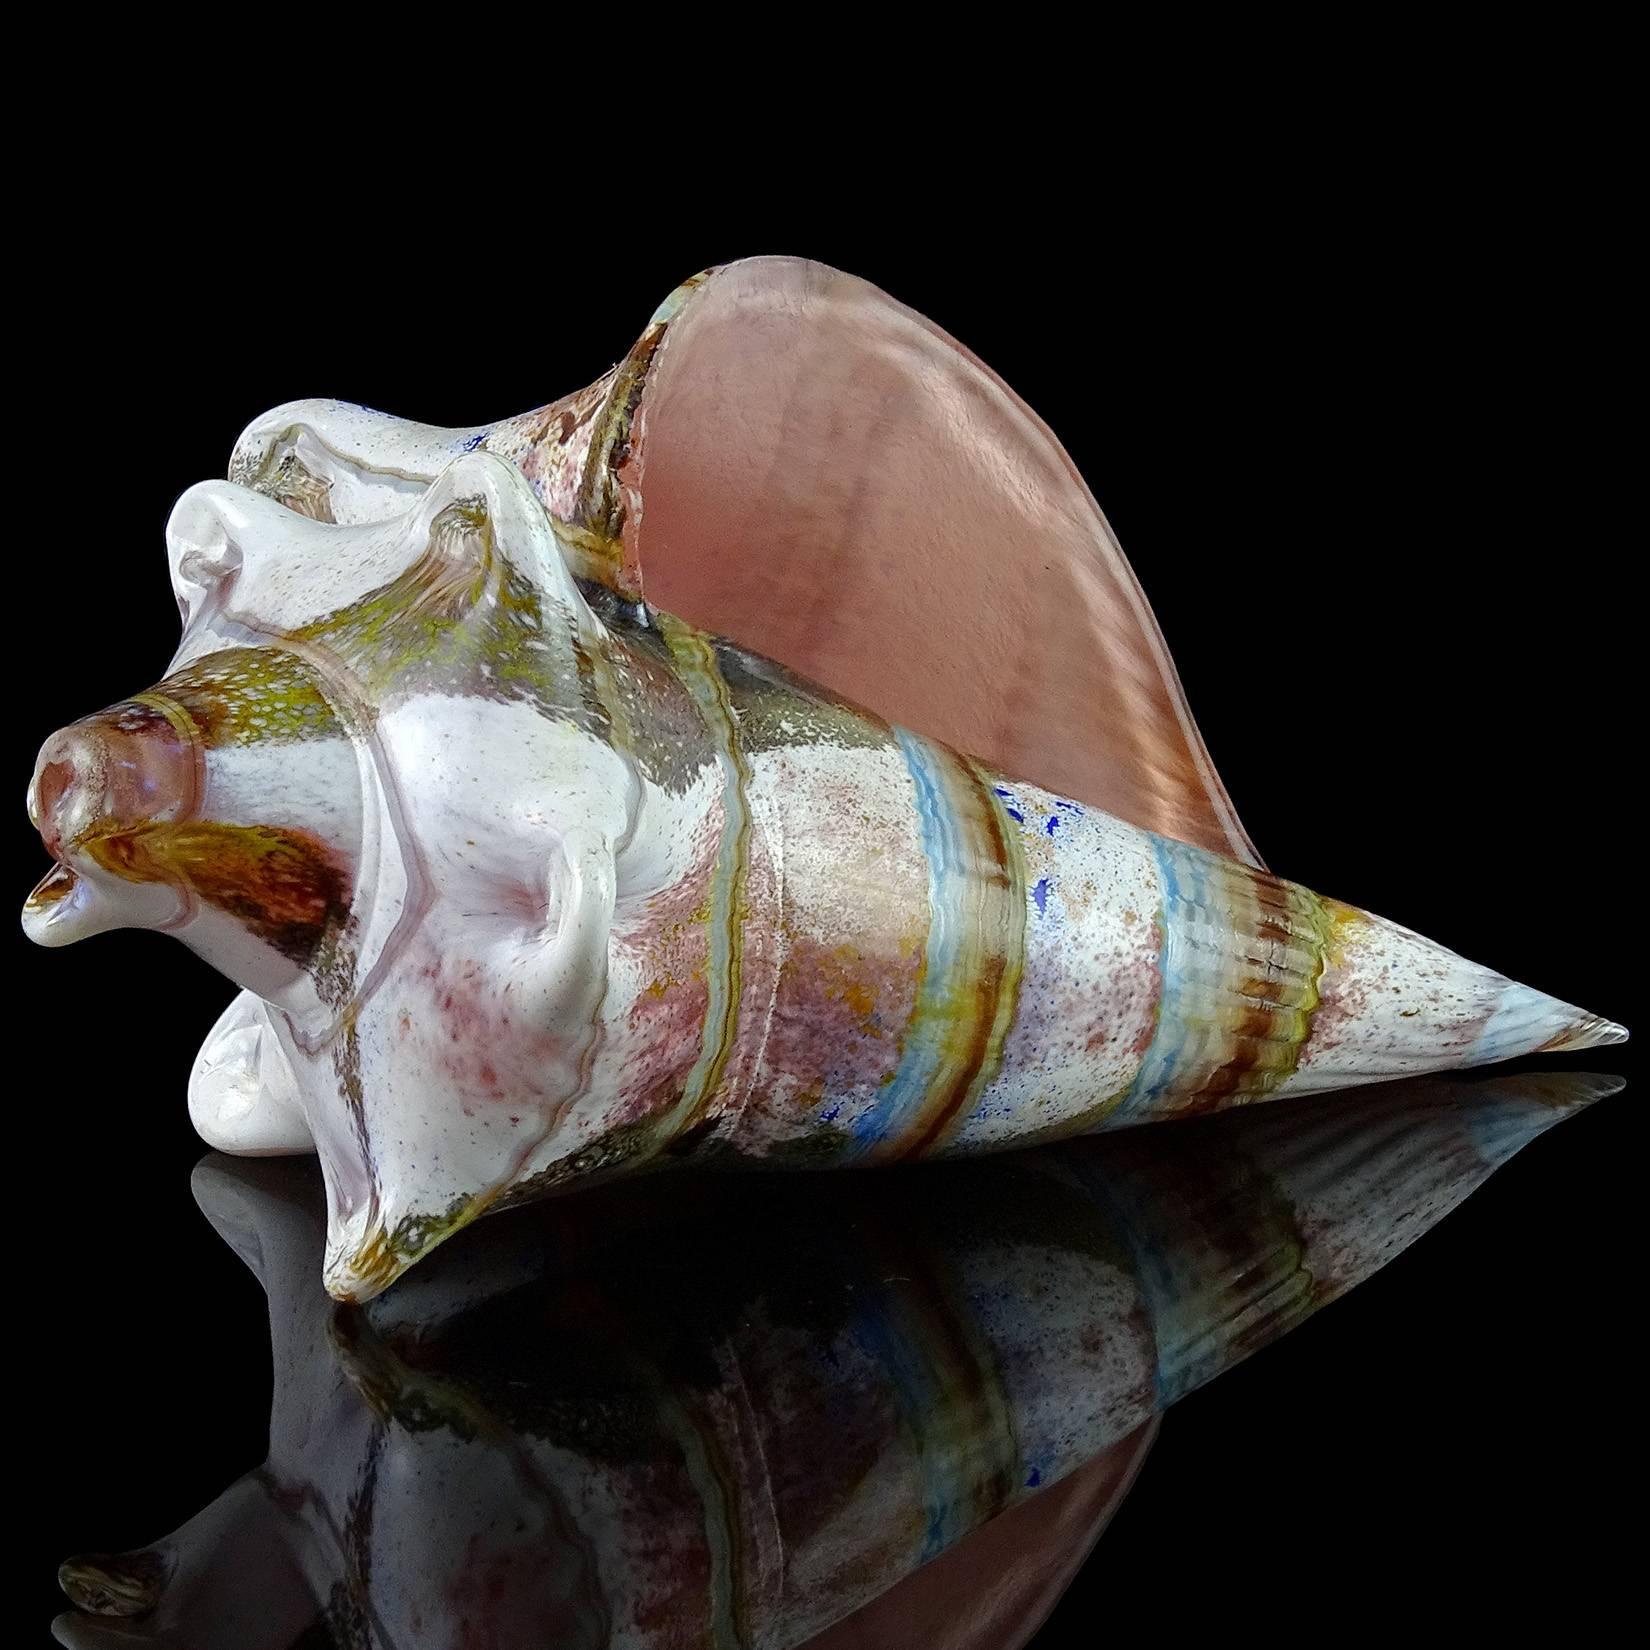 Gorgeous hand blown realistic multicolor Italian art glass conch shell sculpture. Unsigned. Very well detailed, looks like a true natural specimen. It has a soft pink interior, with blue, yellow, white, maroon and light sand colors. The seashell